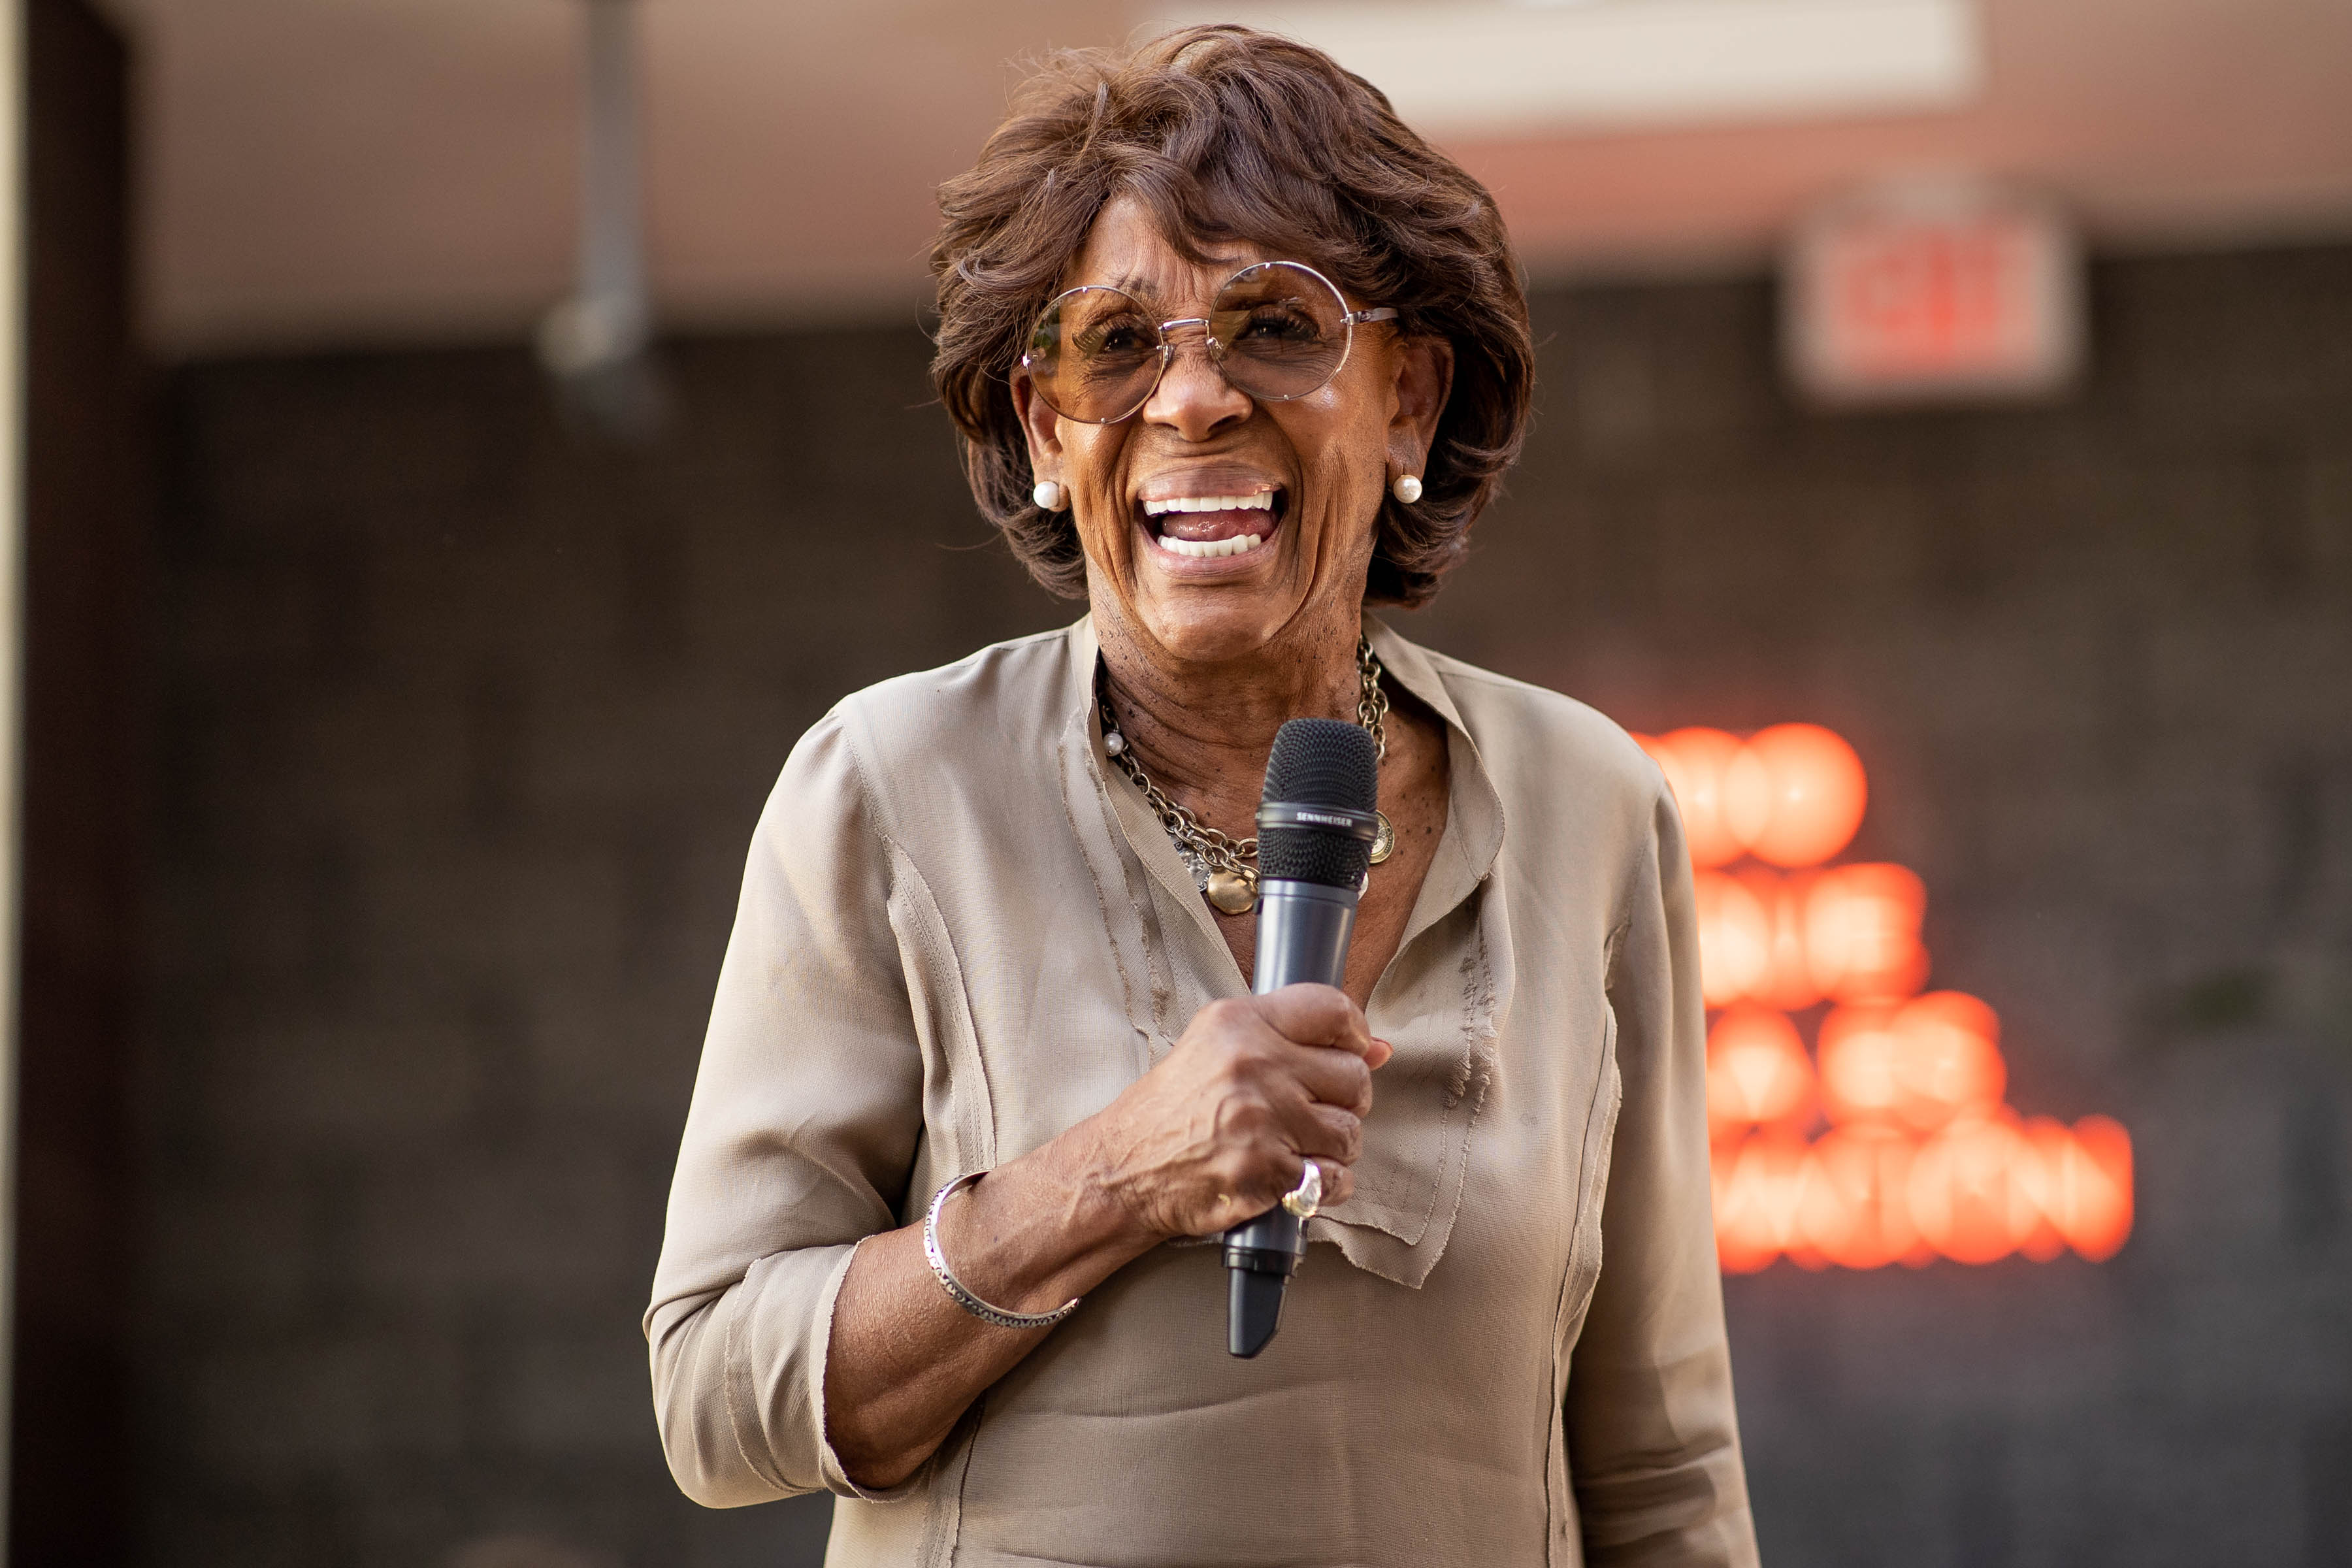 Maxine Waters says when Mitch McConnell ‘opens his mouth I tend to turn him off’